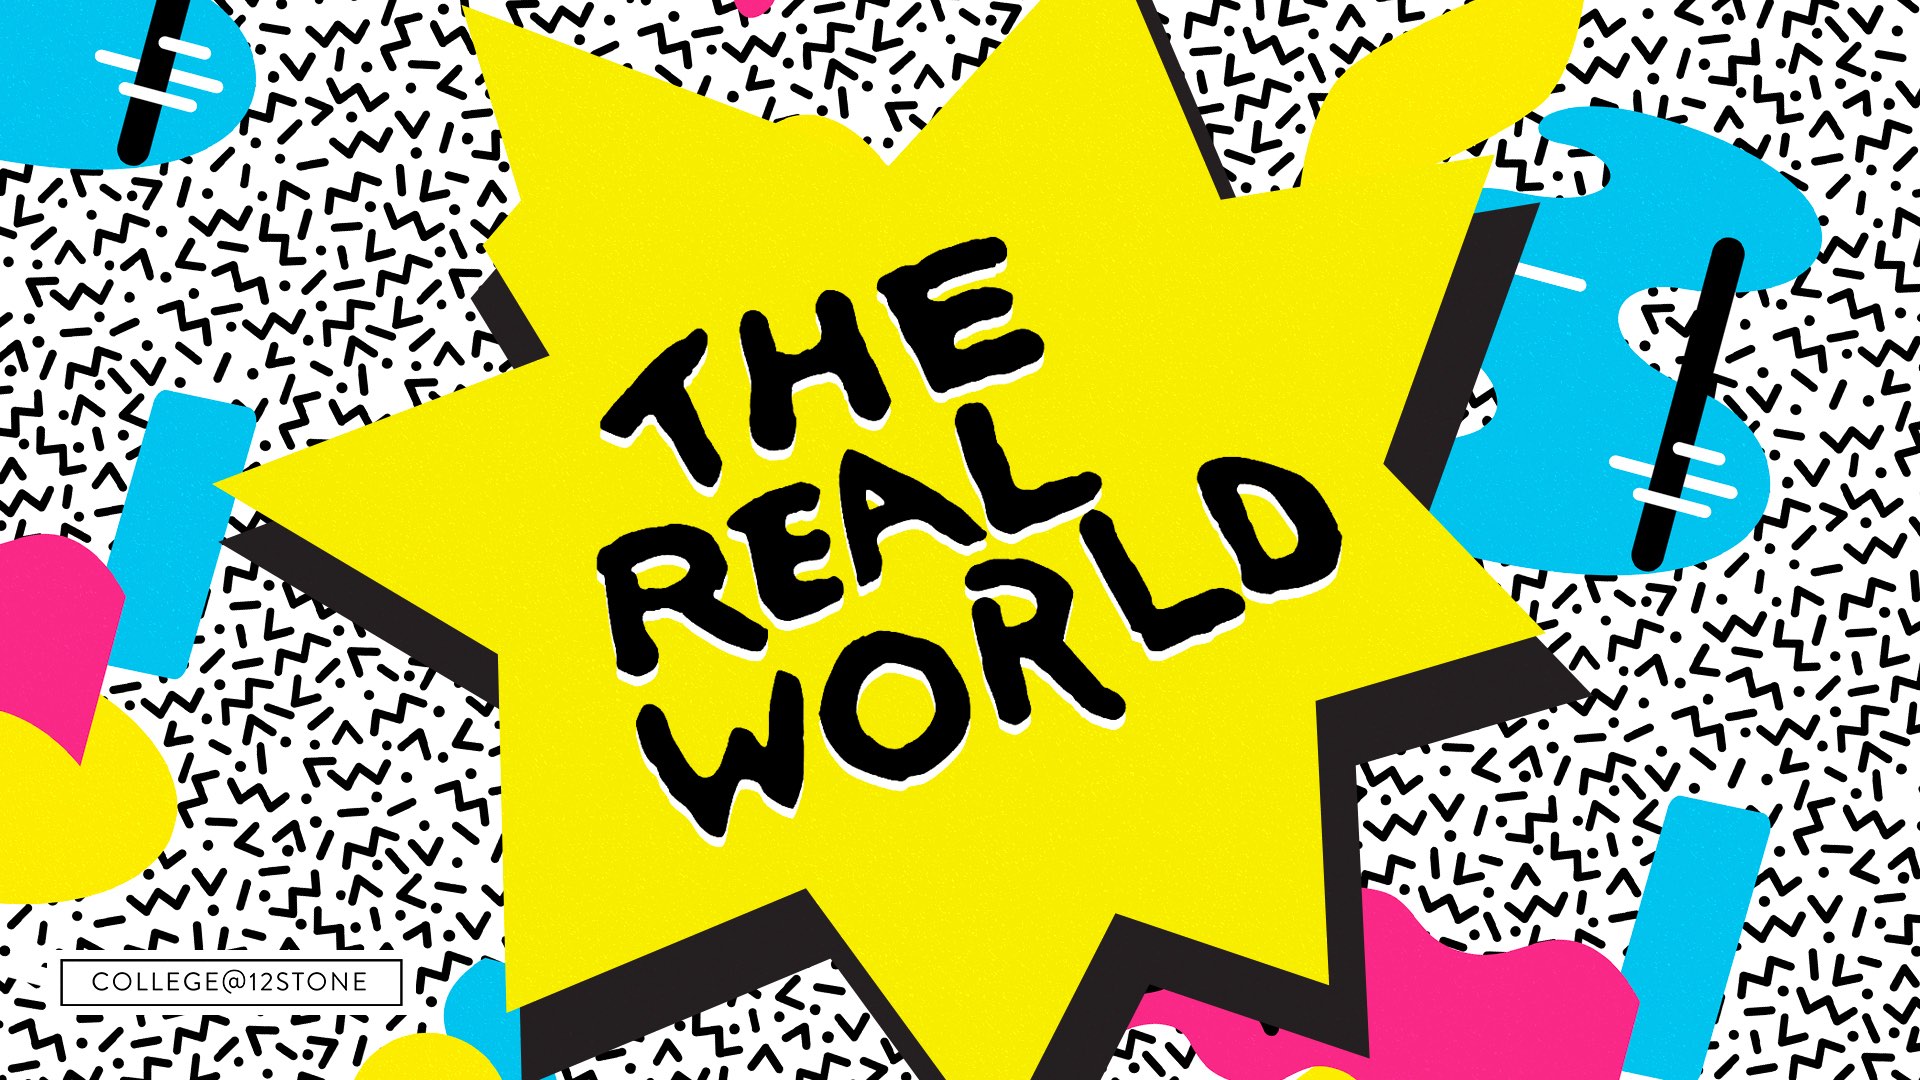 The Real World - Week 1